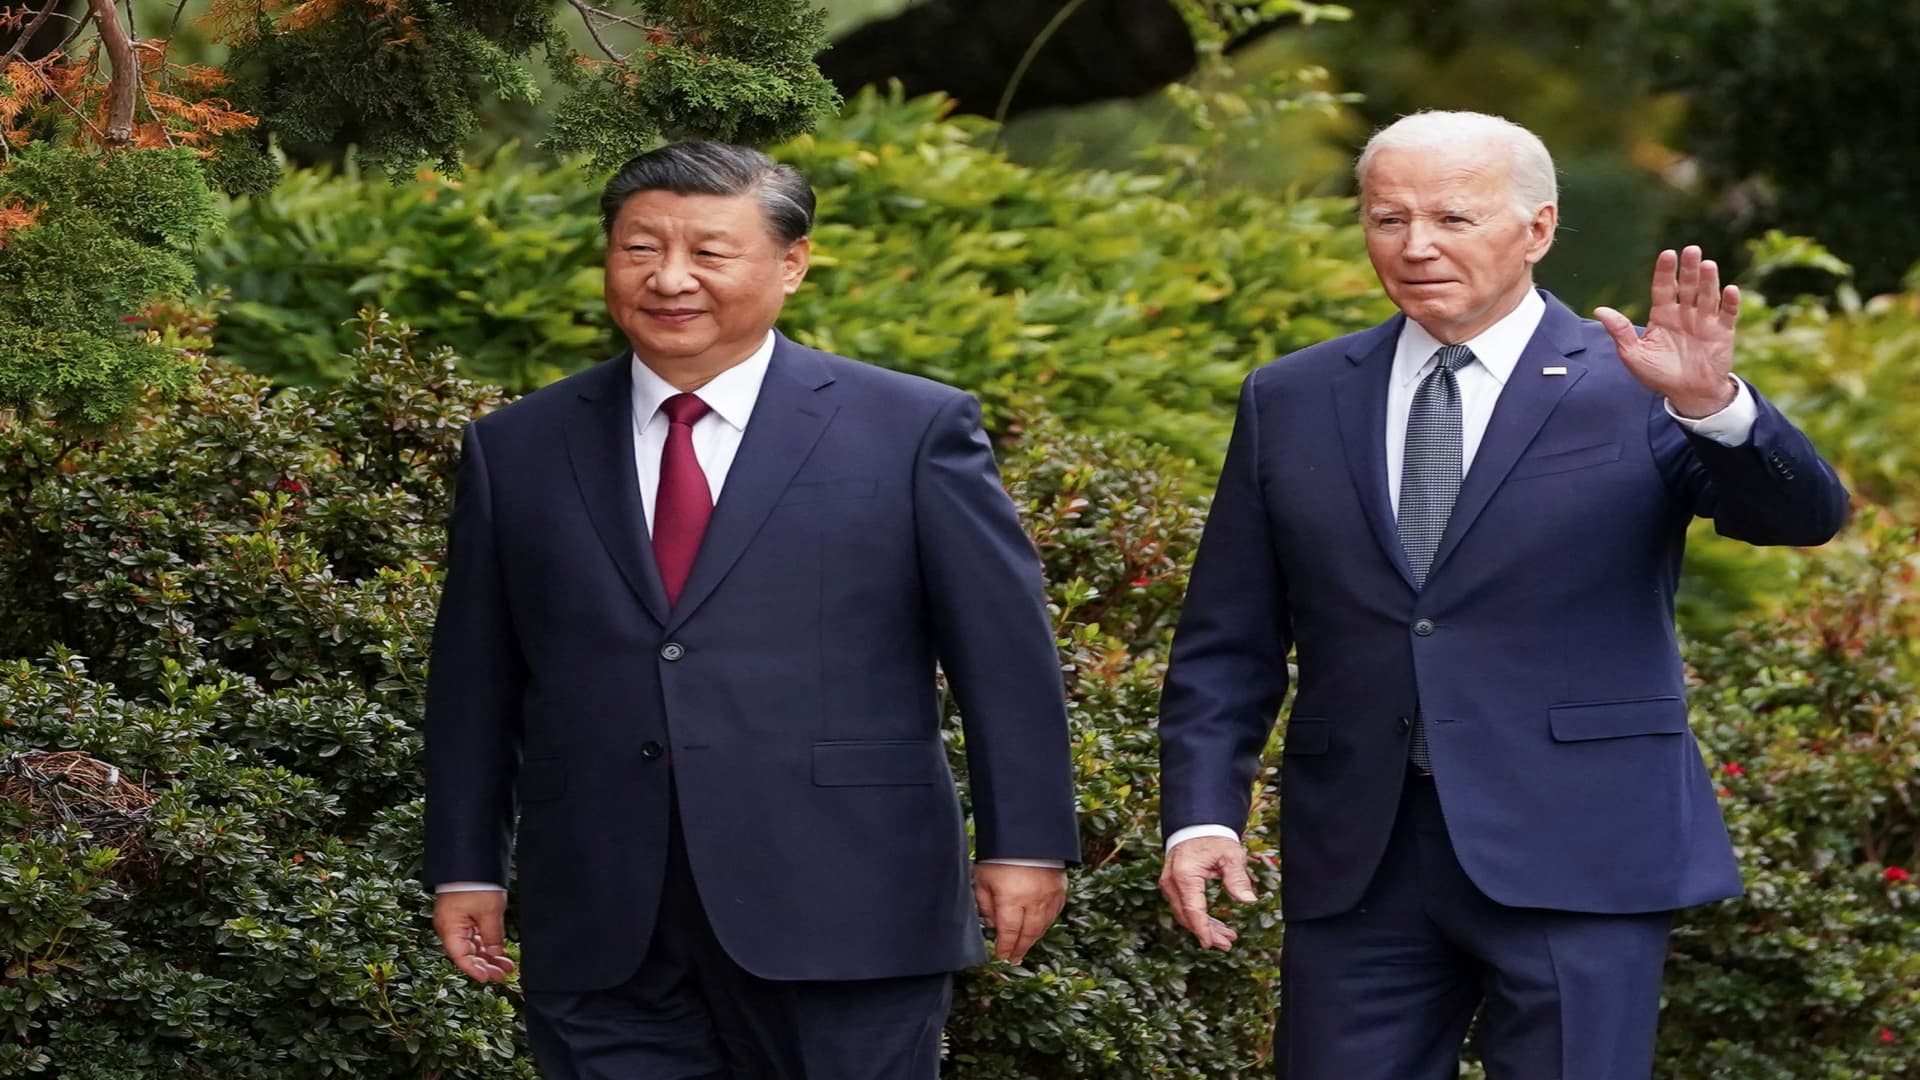 Biden and Xi’s meeting sent an important signal for U.S. business in China